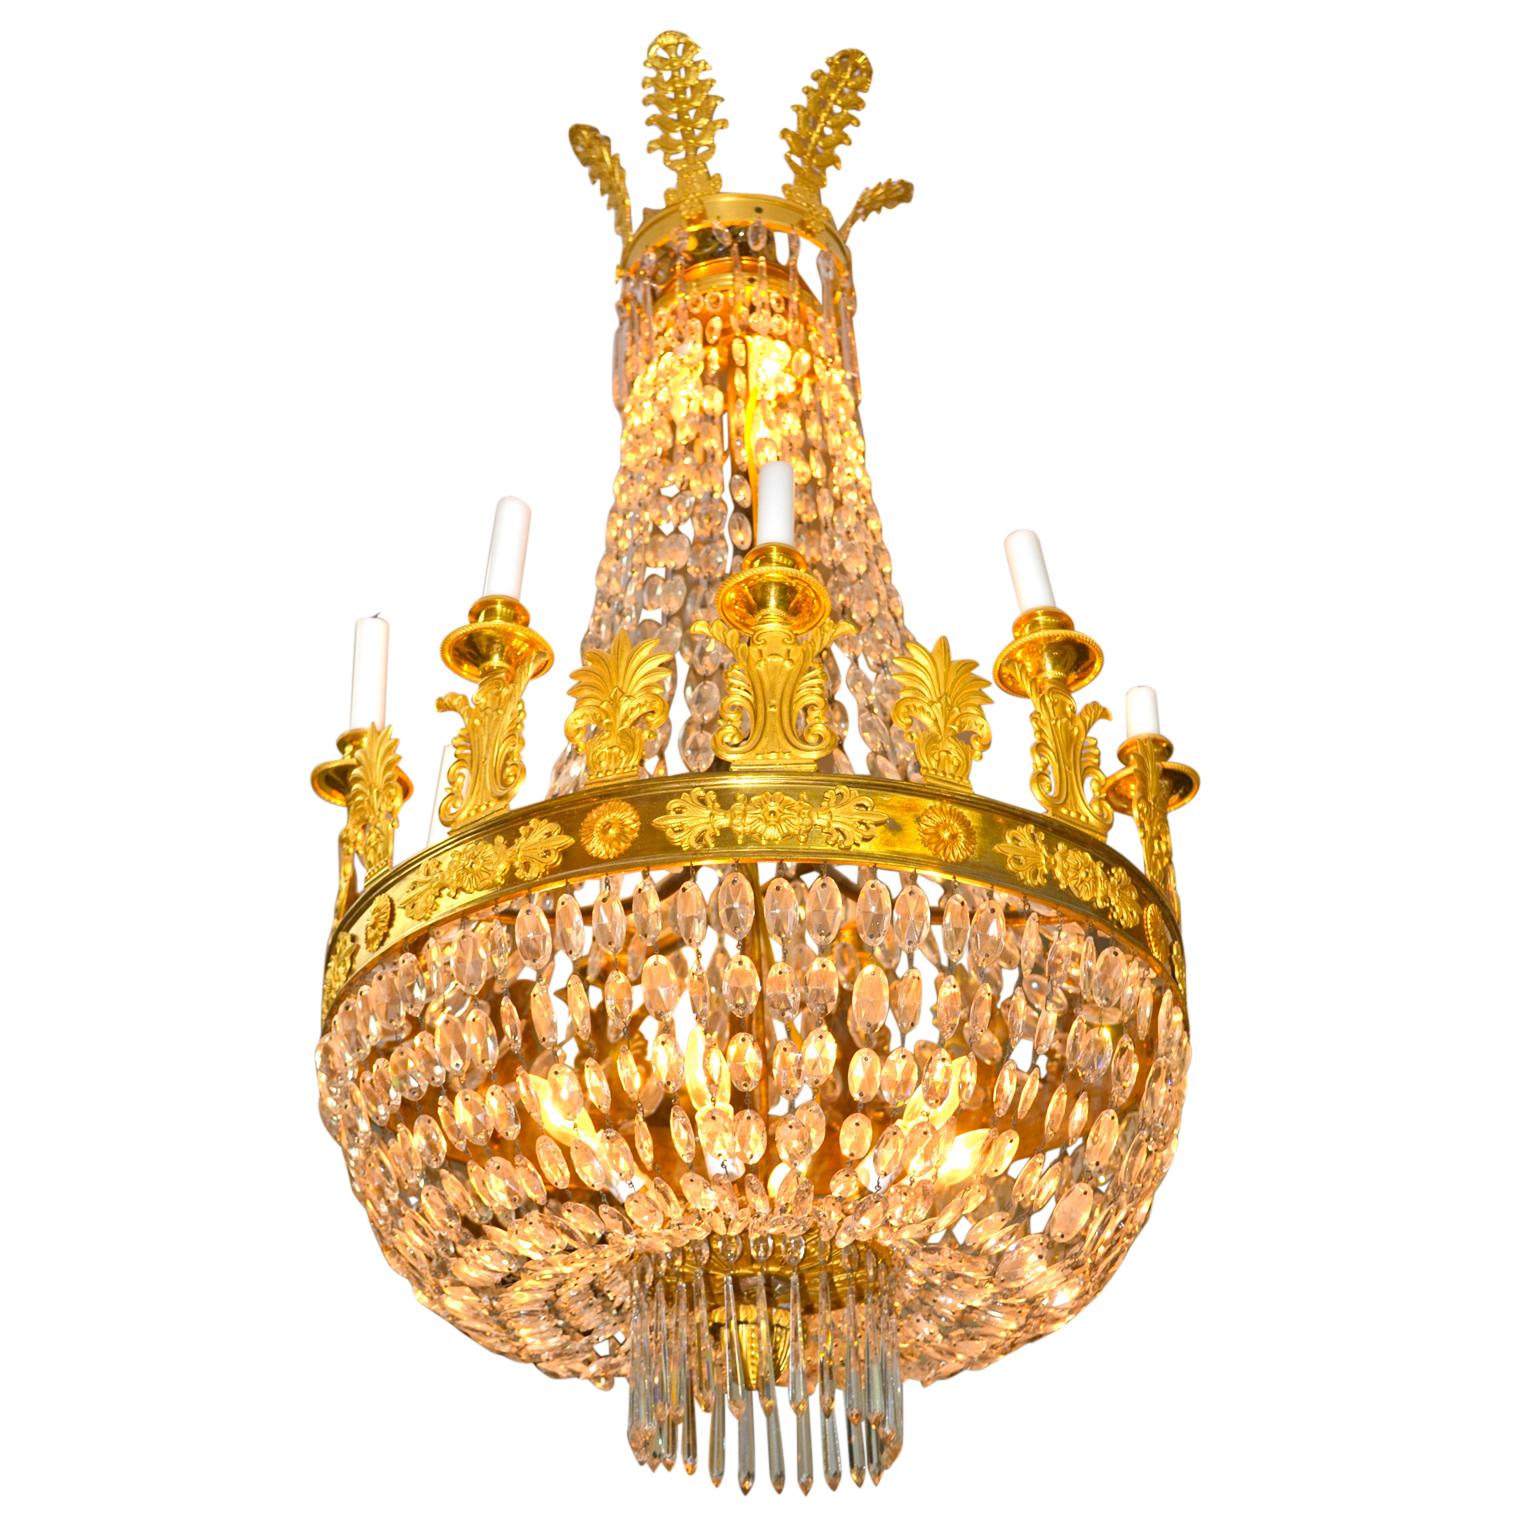 A period French Empire basket style crystal and gilt bronze chandelier with nine candle nozzles. The chandelier has a top section decorated with crystal swags and large gilded palmettes with the body suspended with strings of graduated crystal